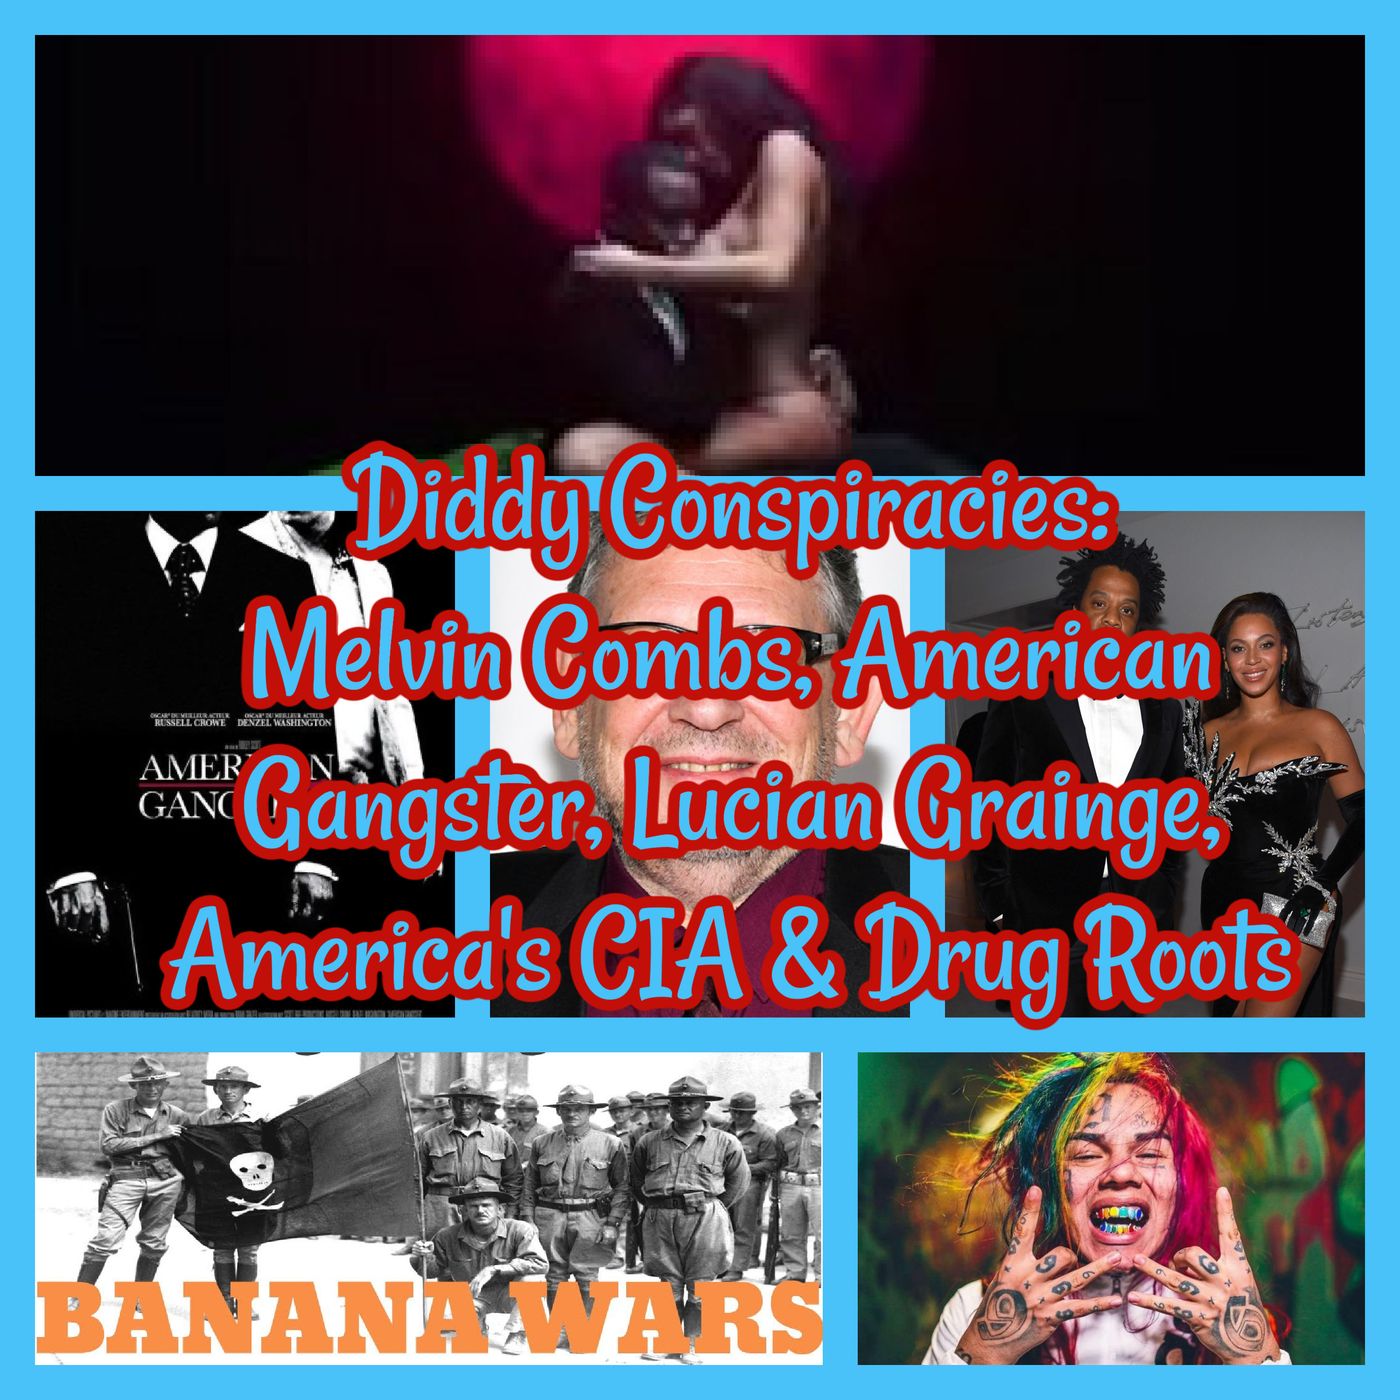 Diddy Conspiracies: Melvin Combs, American Gangster, Lucian Grainge, America’s CIA & Drug Roots